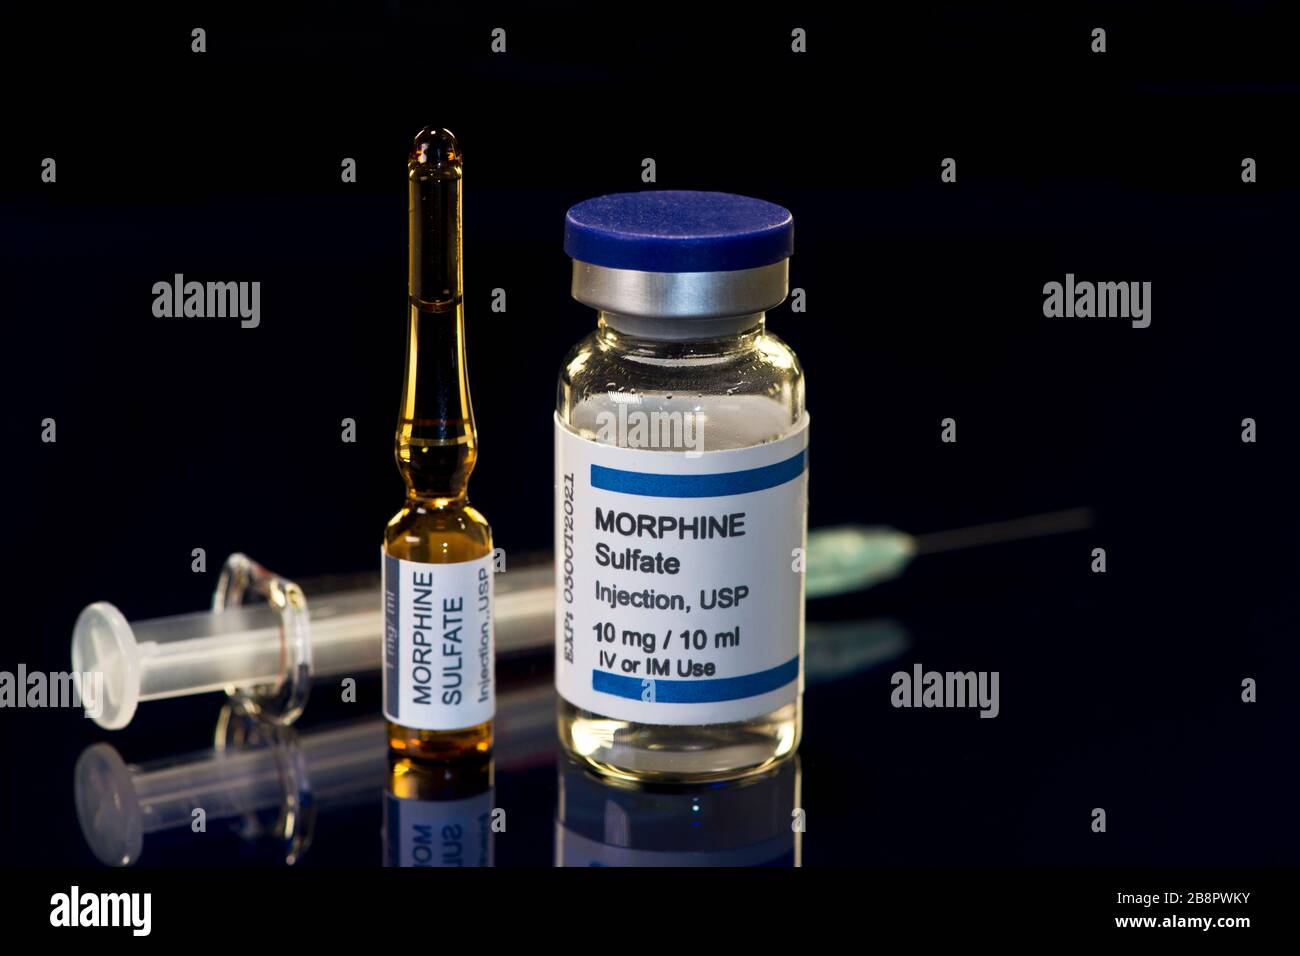 Morphine sulfate vial and ampule and syringe on black refelctive surface. Stock Photo